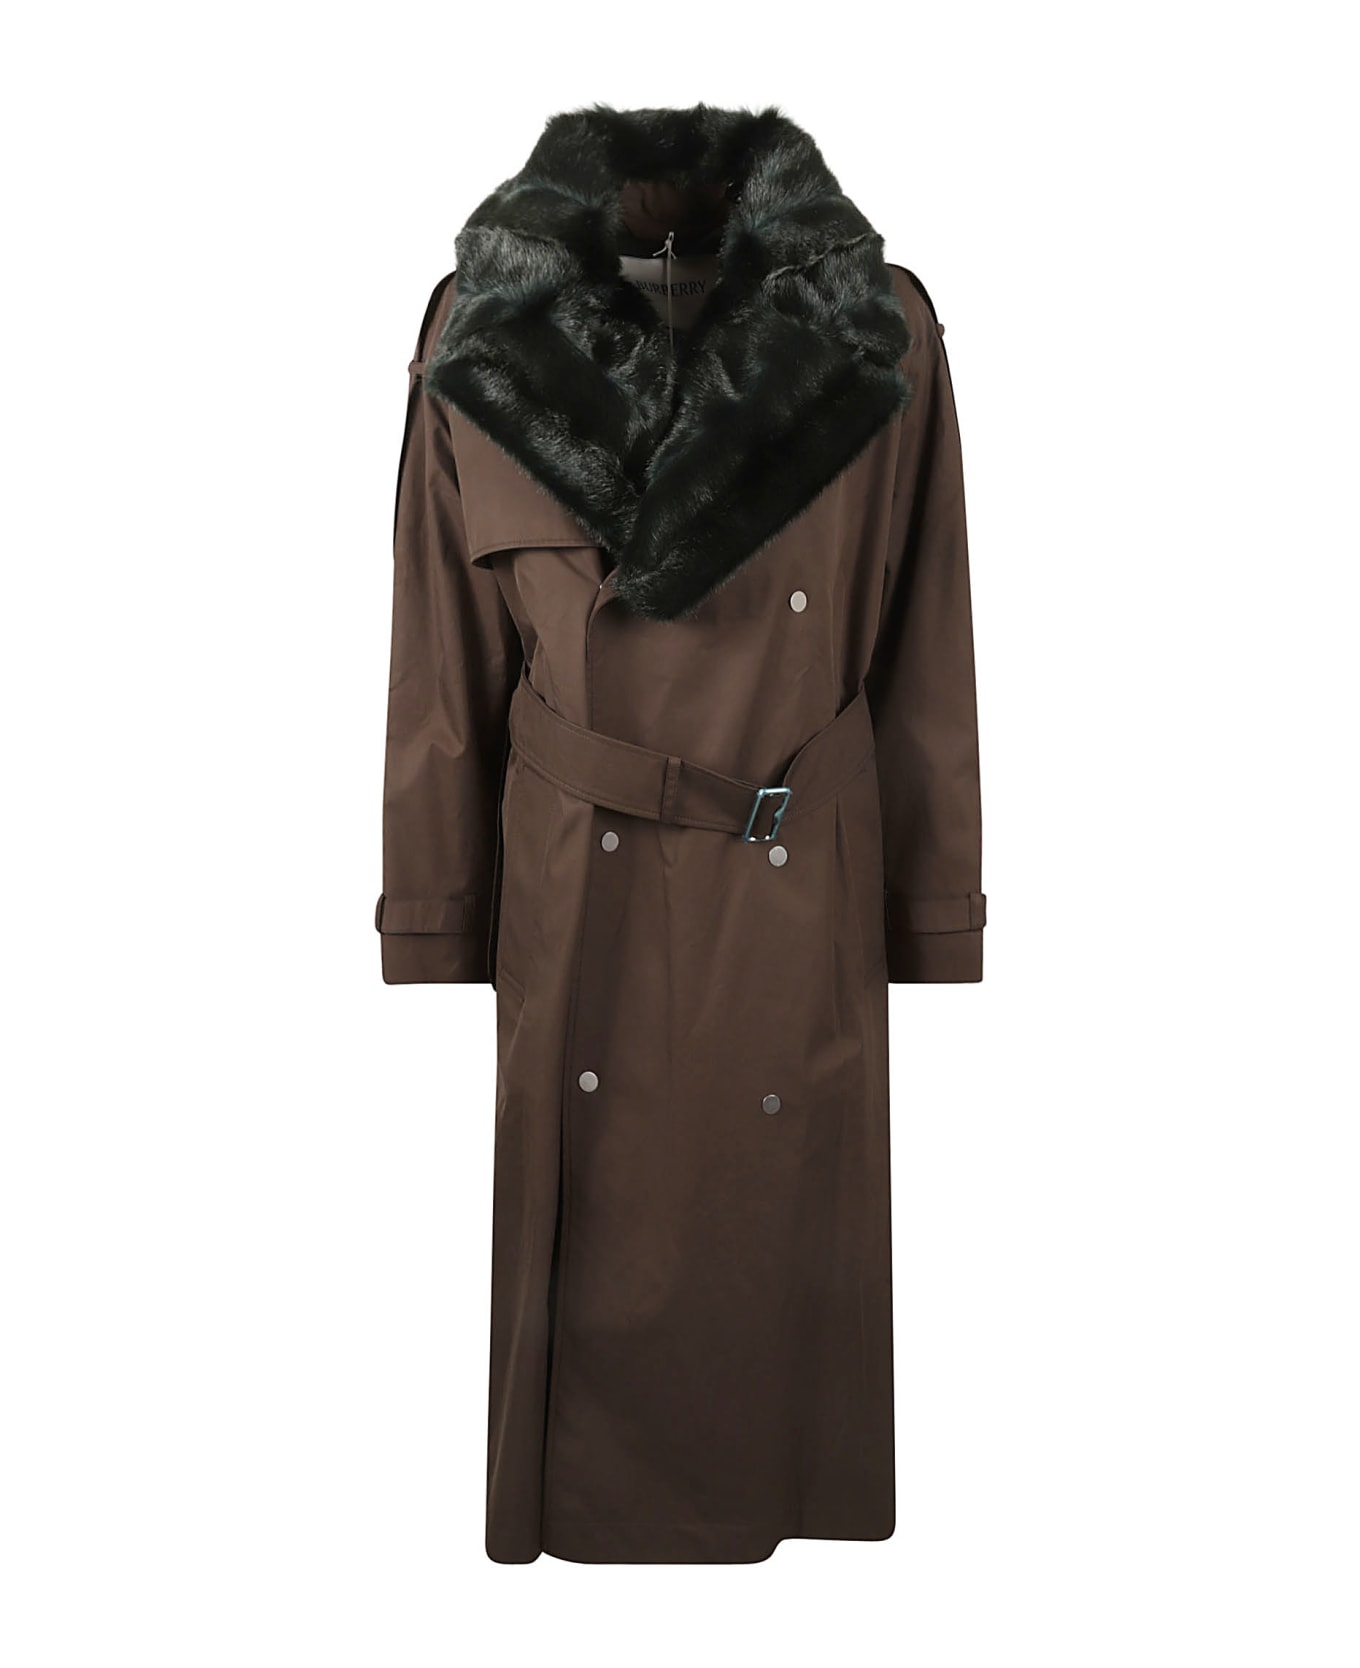 Burberry Fur Double-breasted Belted Coat - Otter